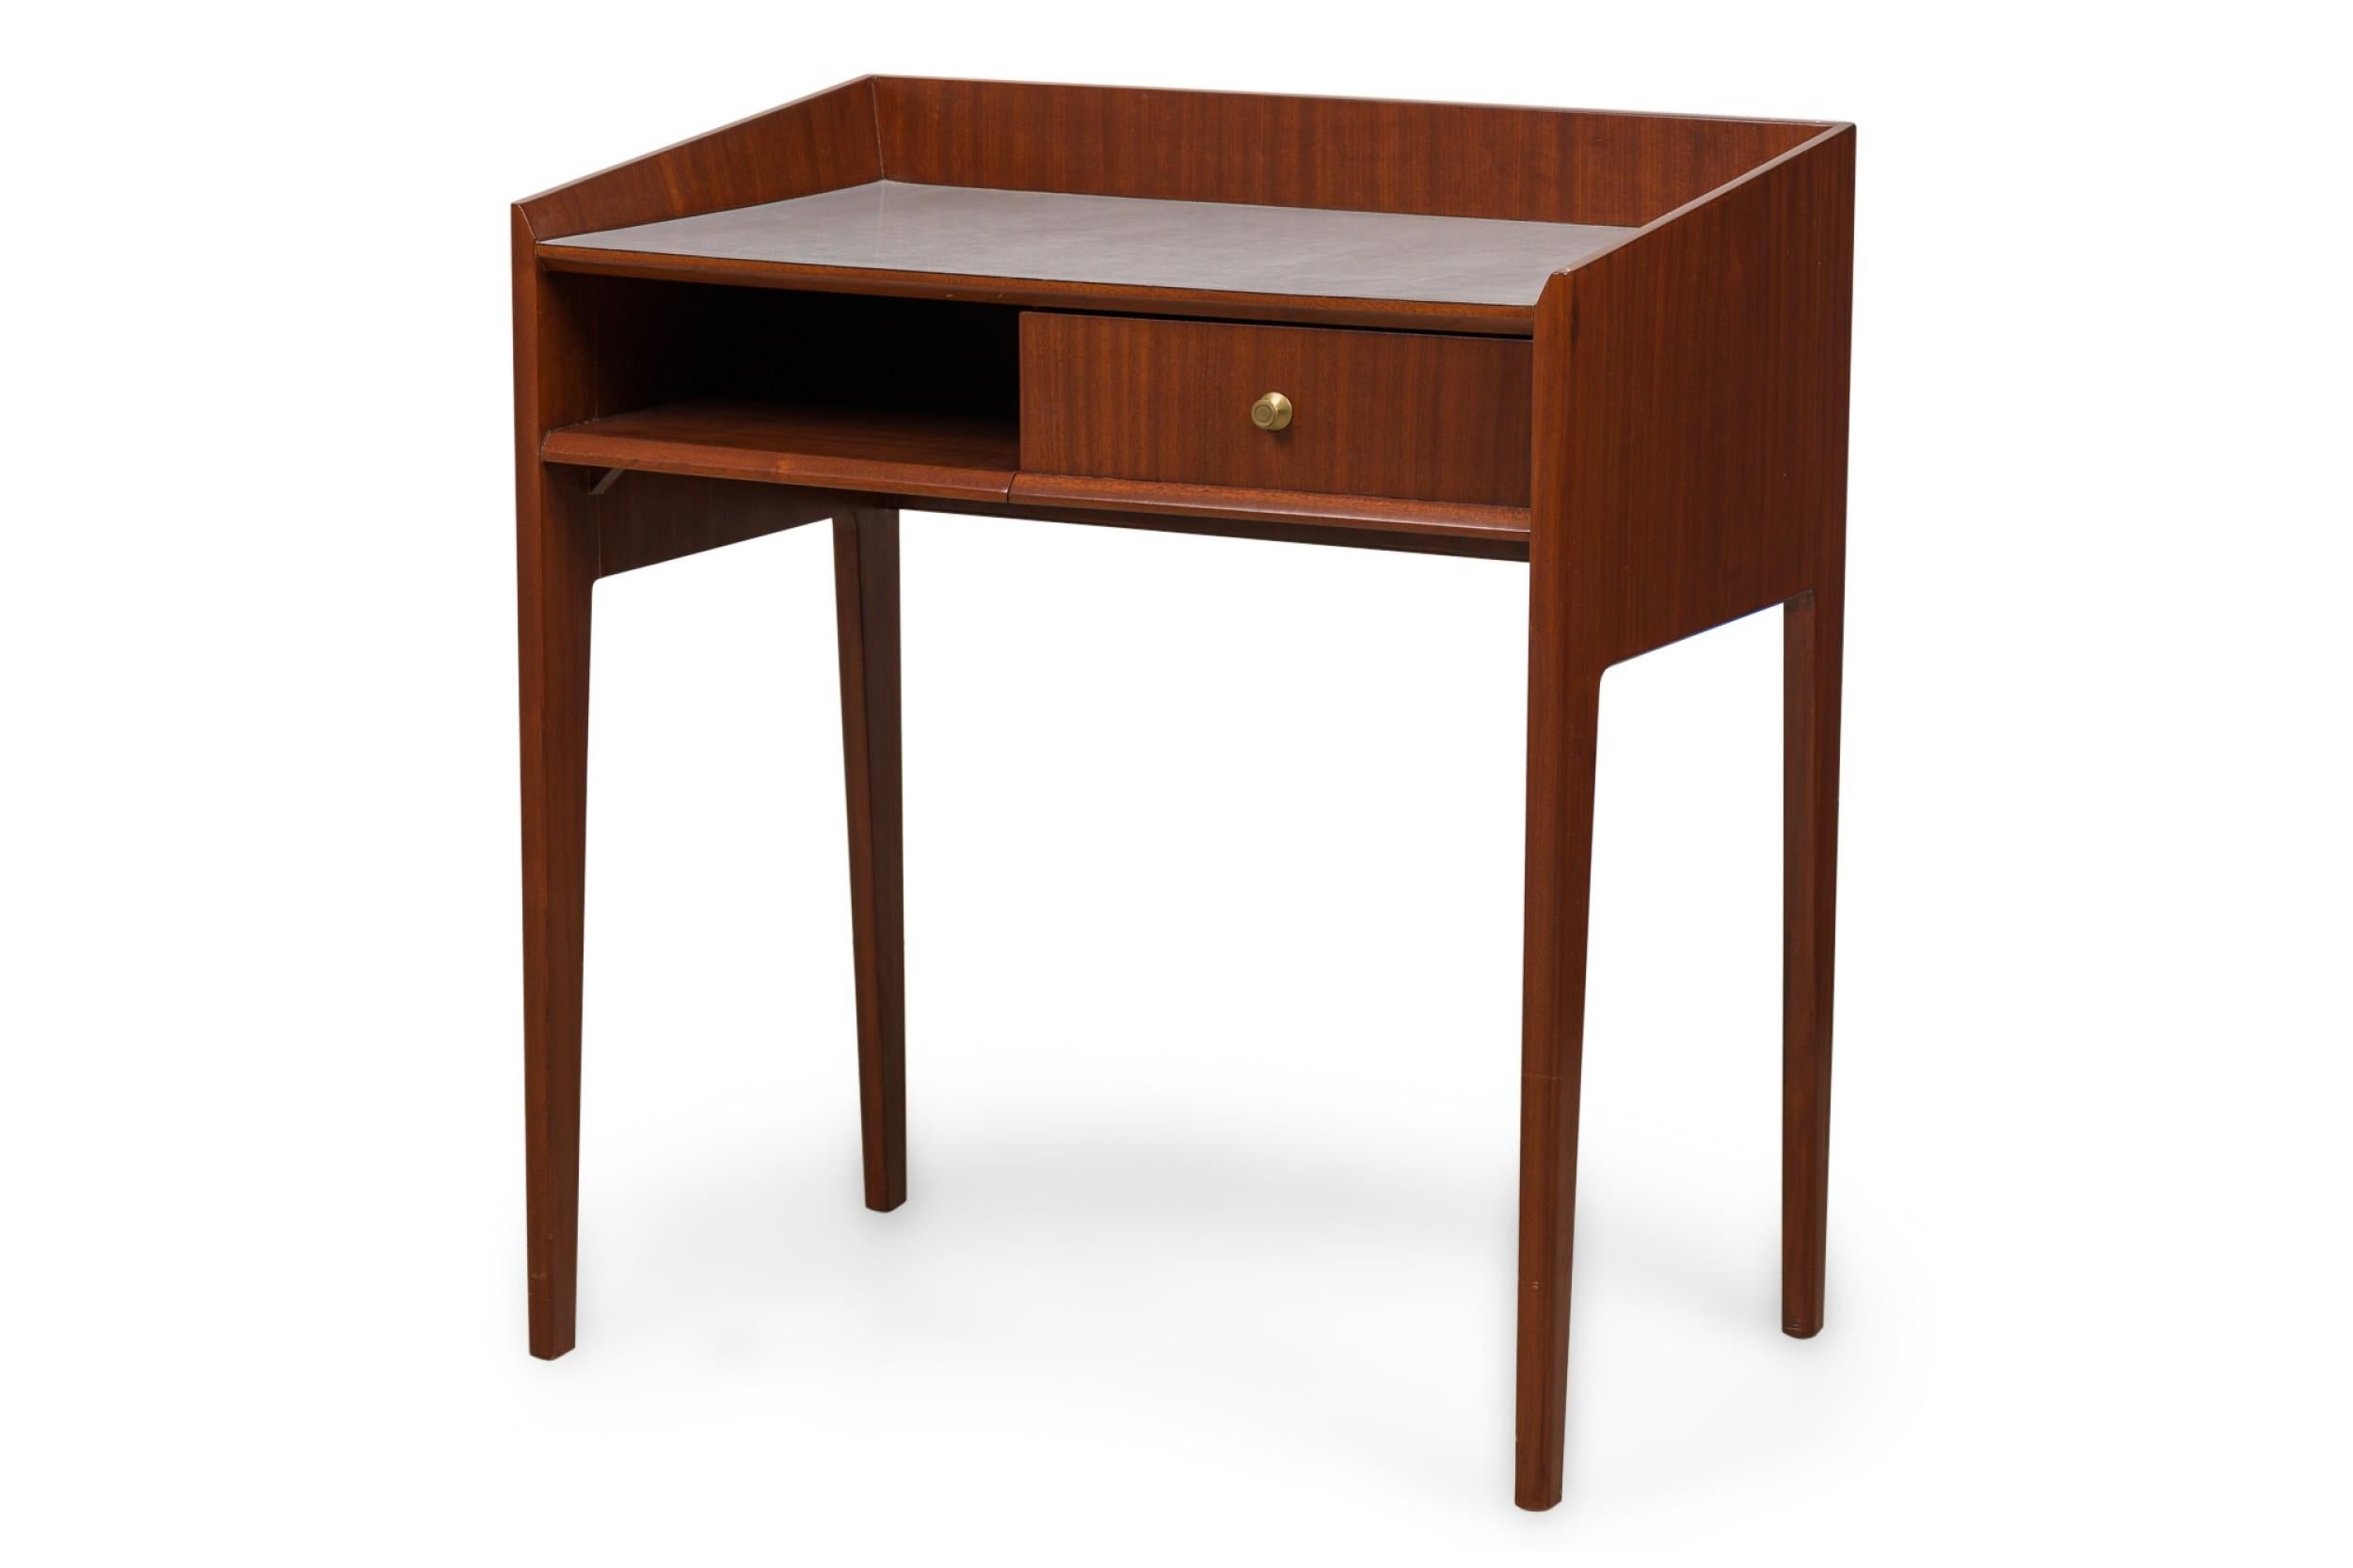 Italian Mid-Century (1950s) mahogany end / side table featuring a high slanted back, slate blue formica top, pullout drawer and cubby storage space. (Style of GIO PONTI)